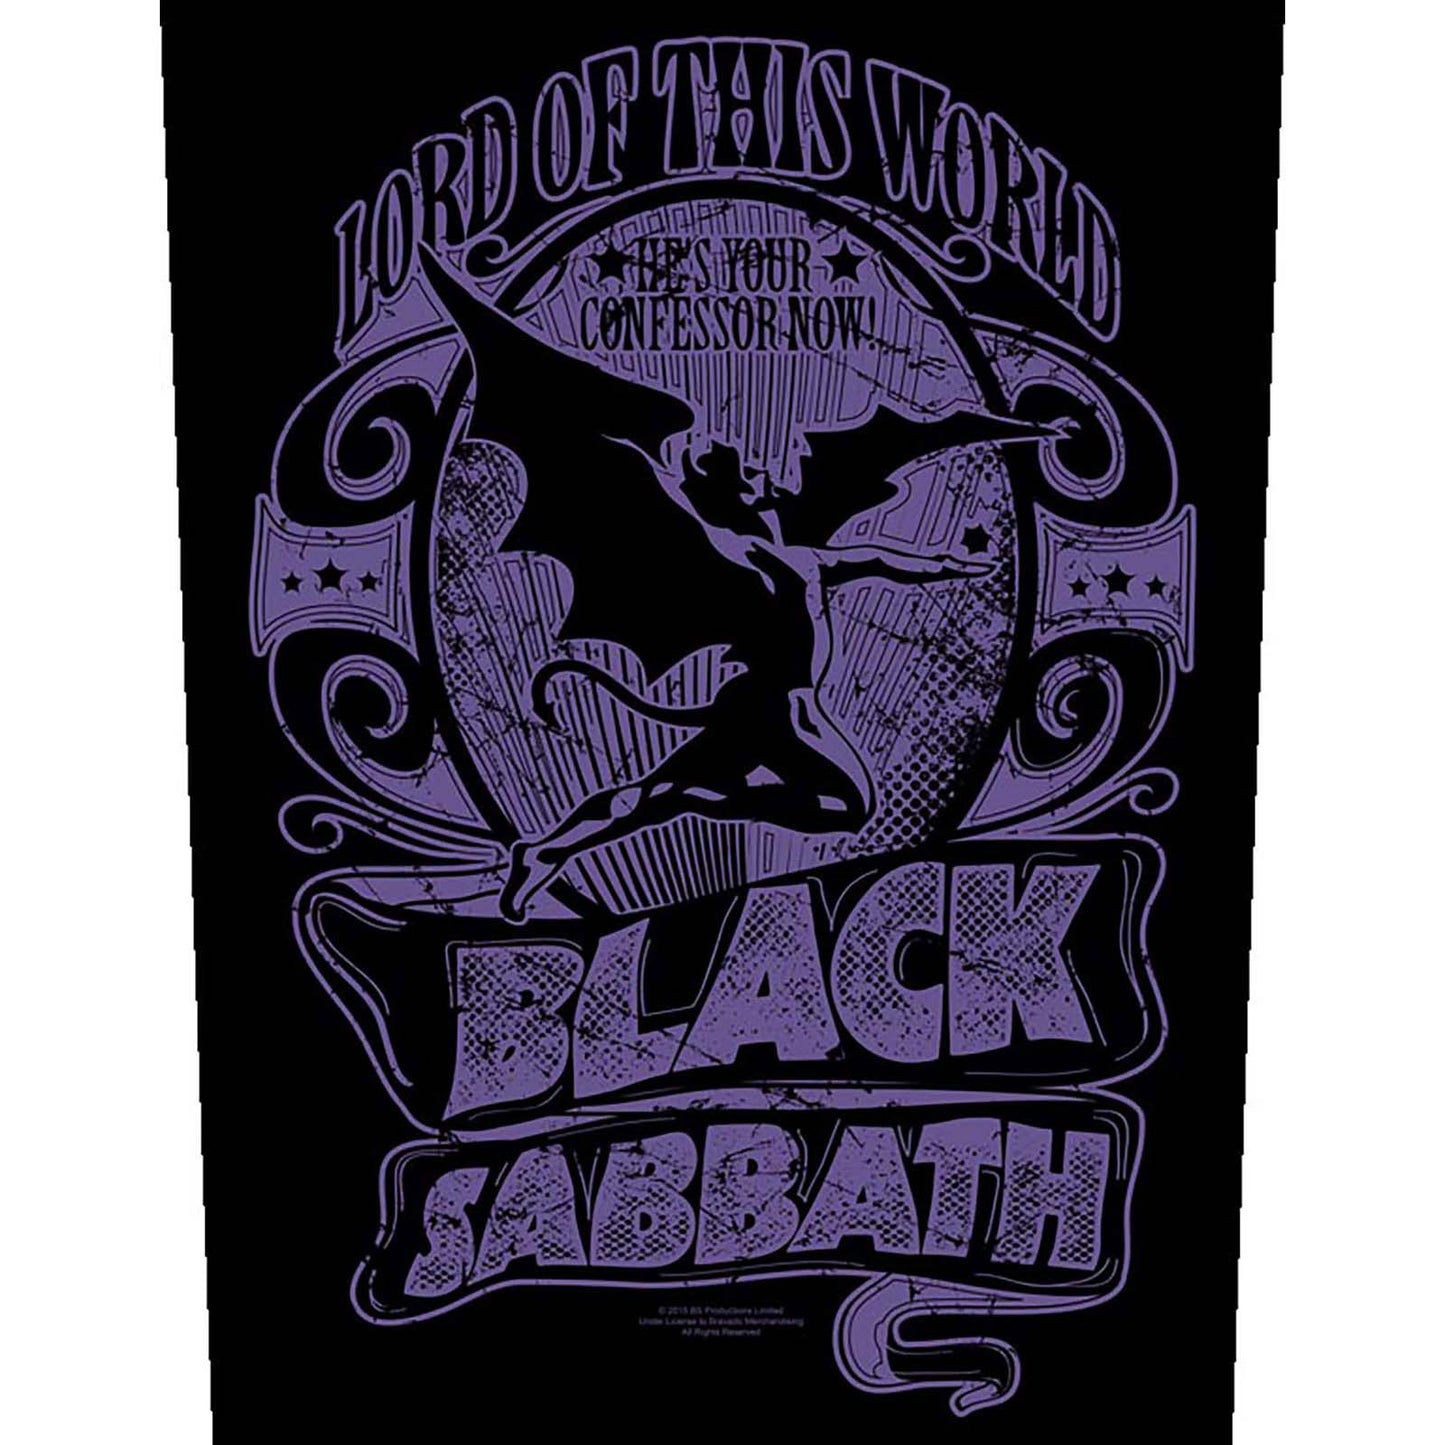 Black Sabbath Back Patch: Lord Of This World